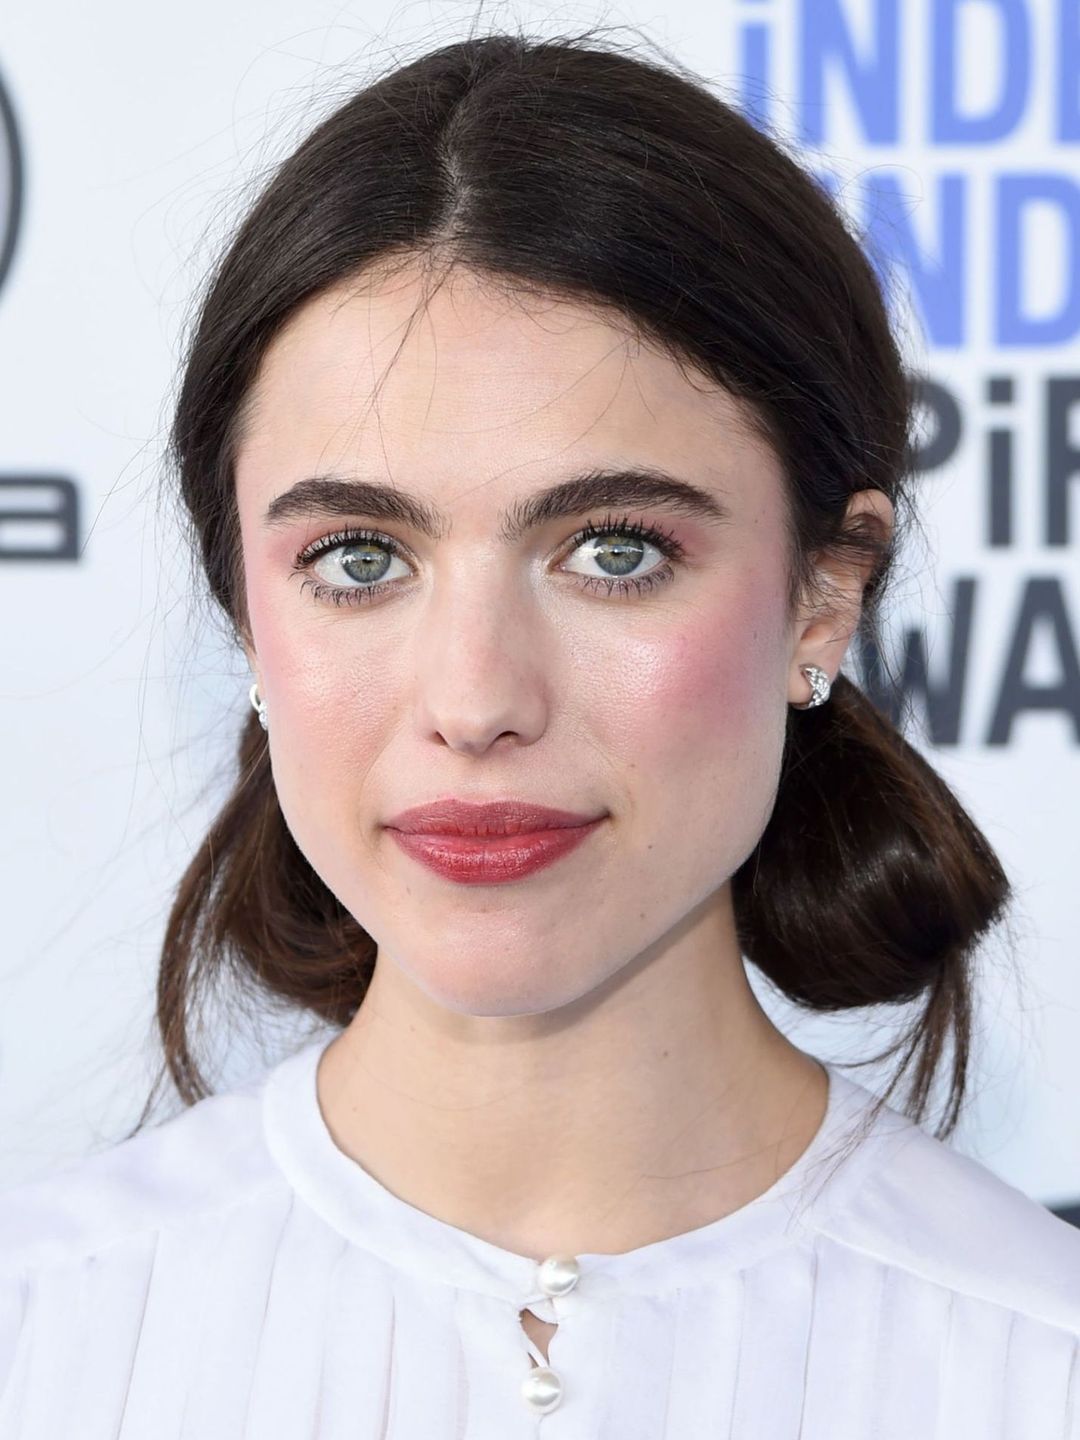 Margaret Qualley where did she study